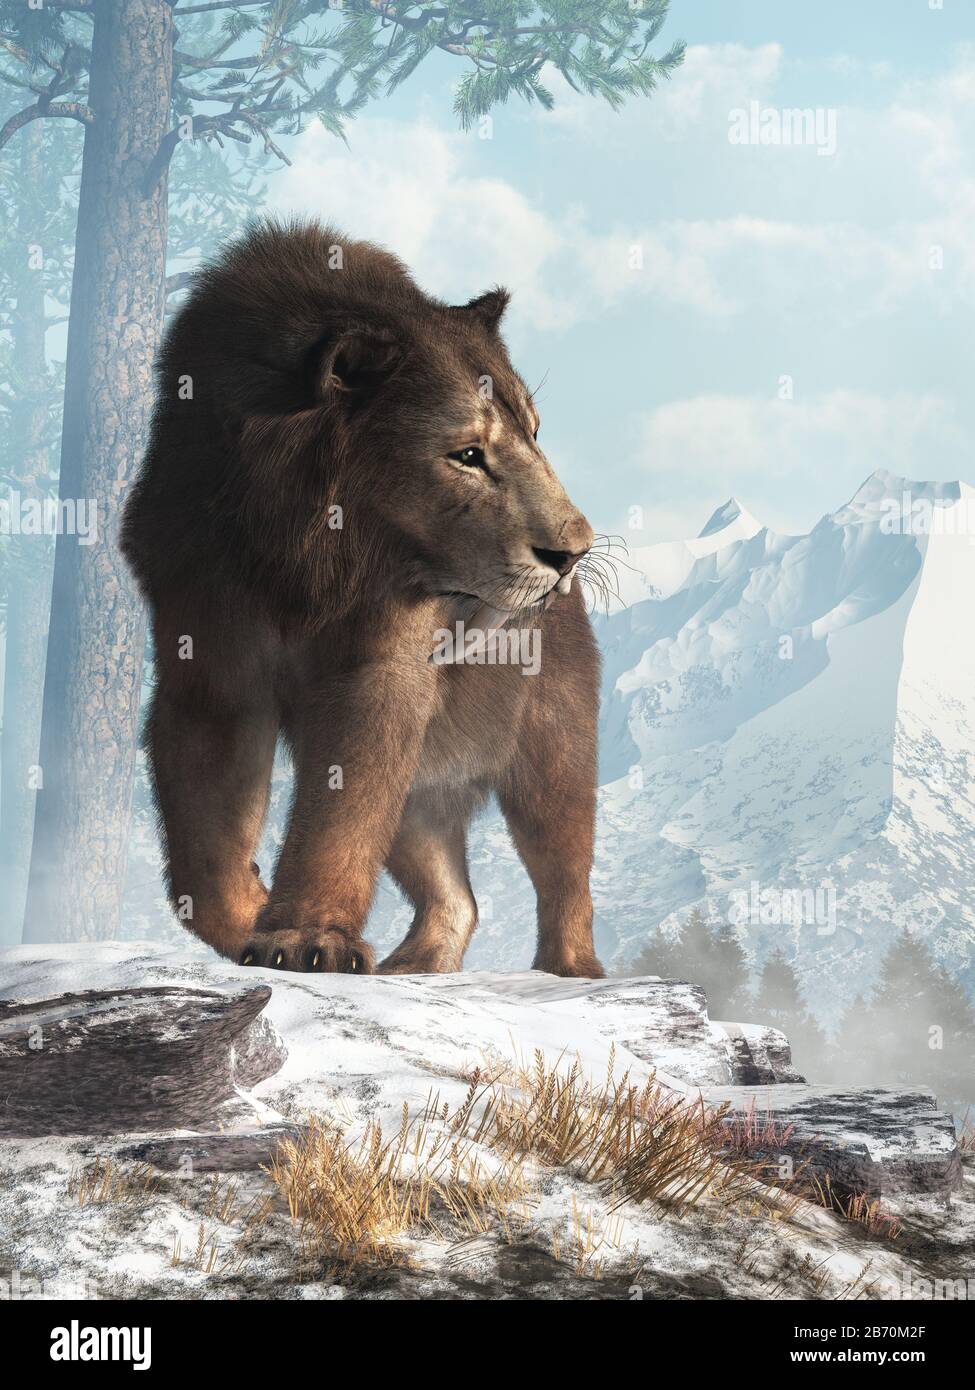 A saber tooth cat stands on a snowy hill and glances into the valley below.  Smilodon populator, the largest cat ever, lived during the Pleistocene er Stock Photo